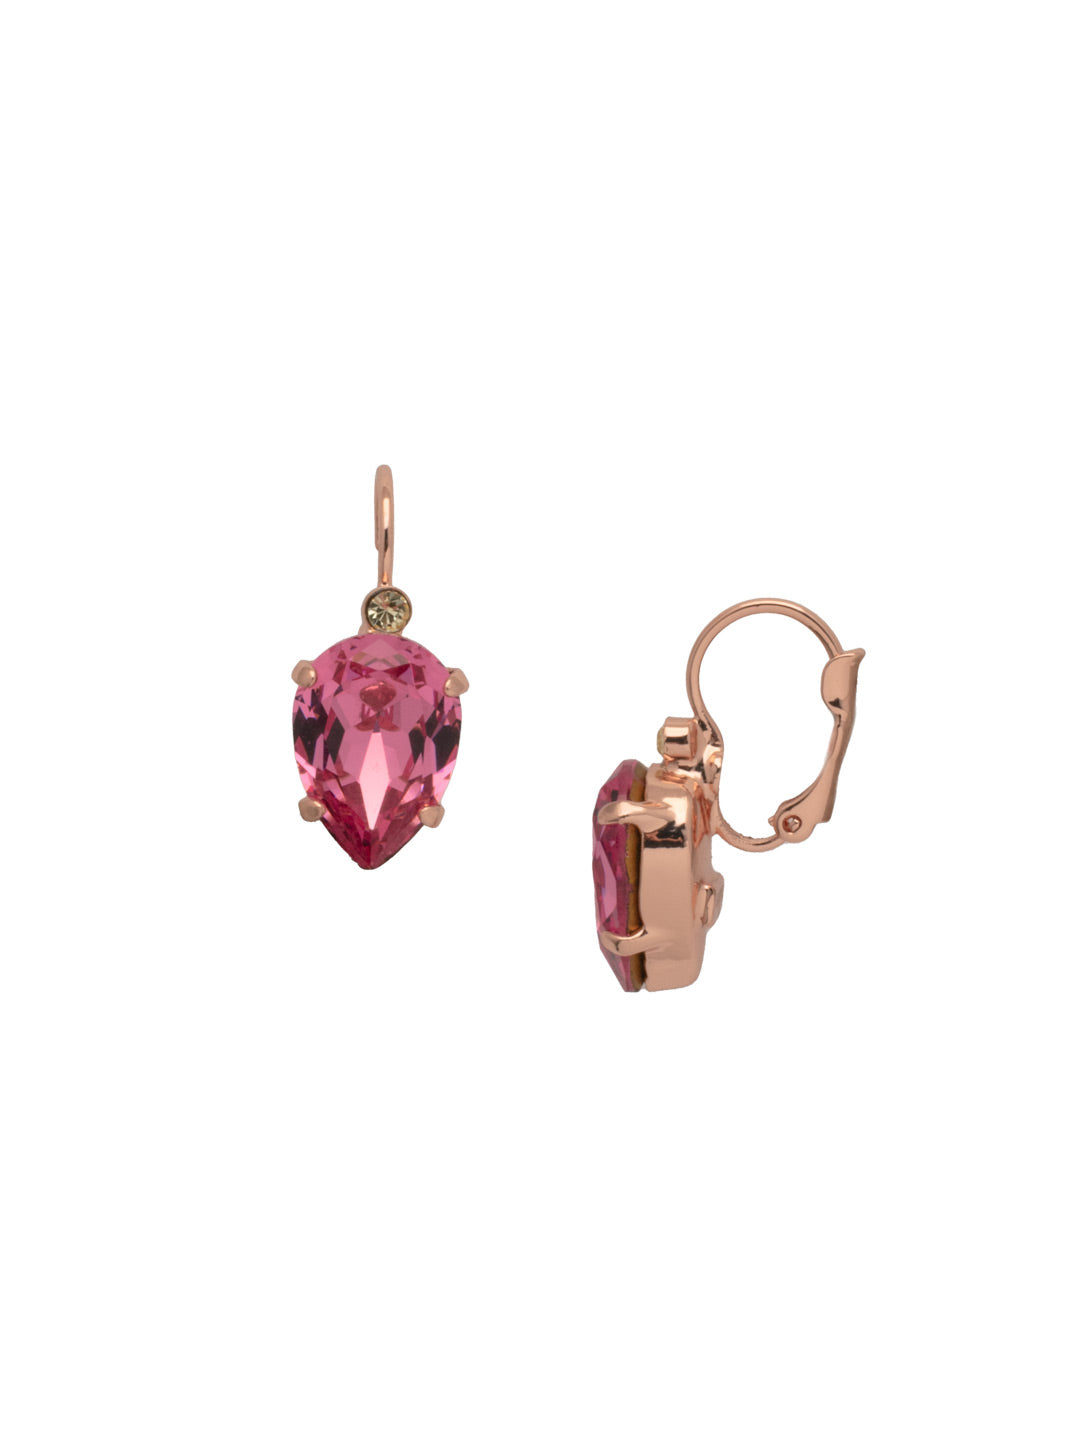 Eileen Studded Dangle Earrings - EFF10RGPPN - <p>The Eileen Studded Dangle Earrings feature a small round cut crystal nestled above a single pear cut crystal, dangling from a lever back French wire. From Sorrelli's Pink Pineapple collection in our Rose Gold-tone finish.</p>